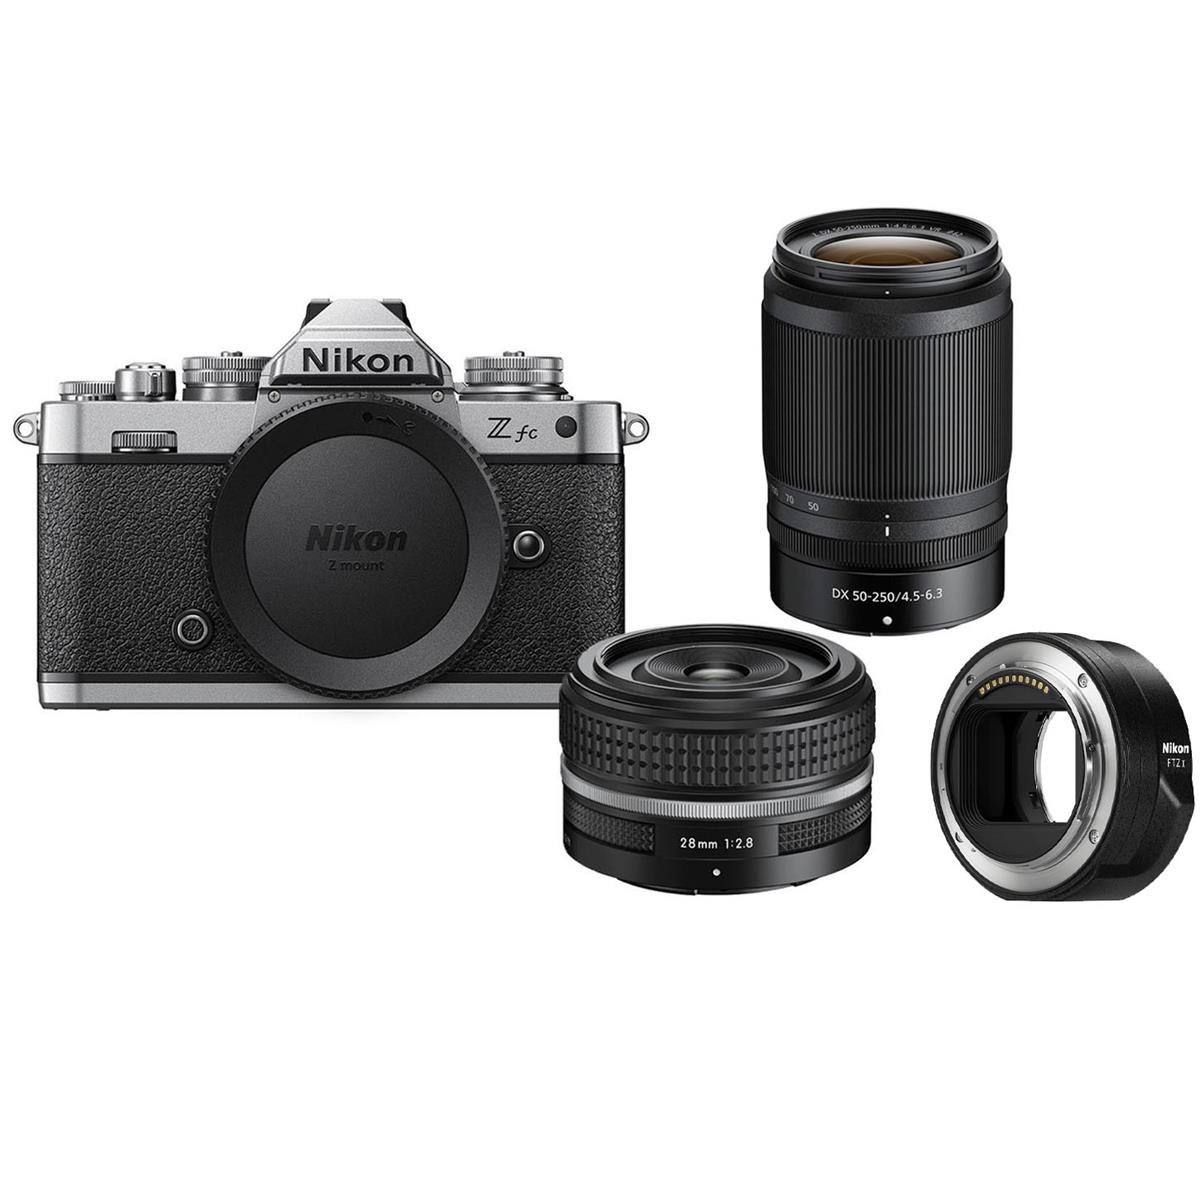 Image of Nikon Z fc Mirrorless Camera with 28mm f/2.8 (SE) &amp; 50-250mm Lens w/FTZ Adapter